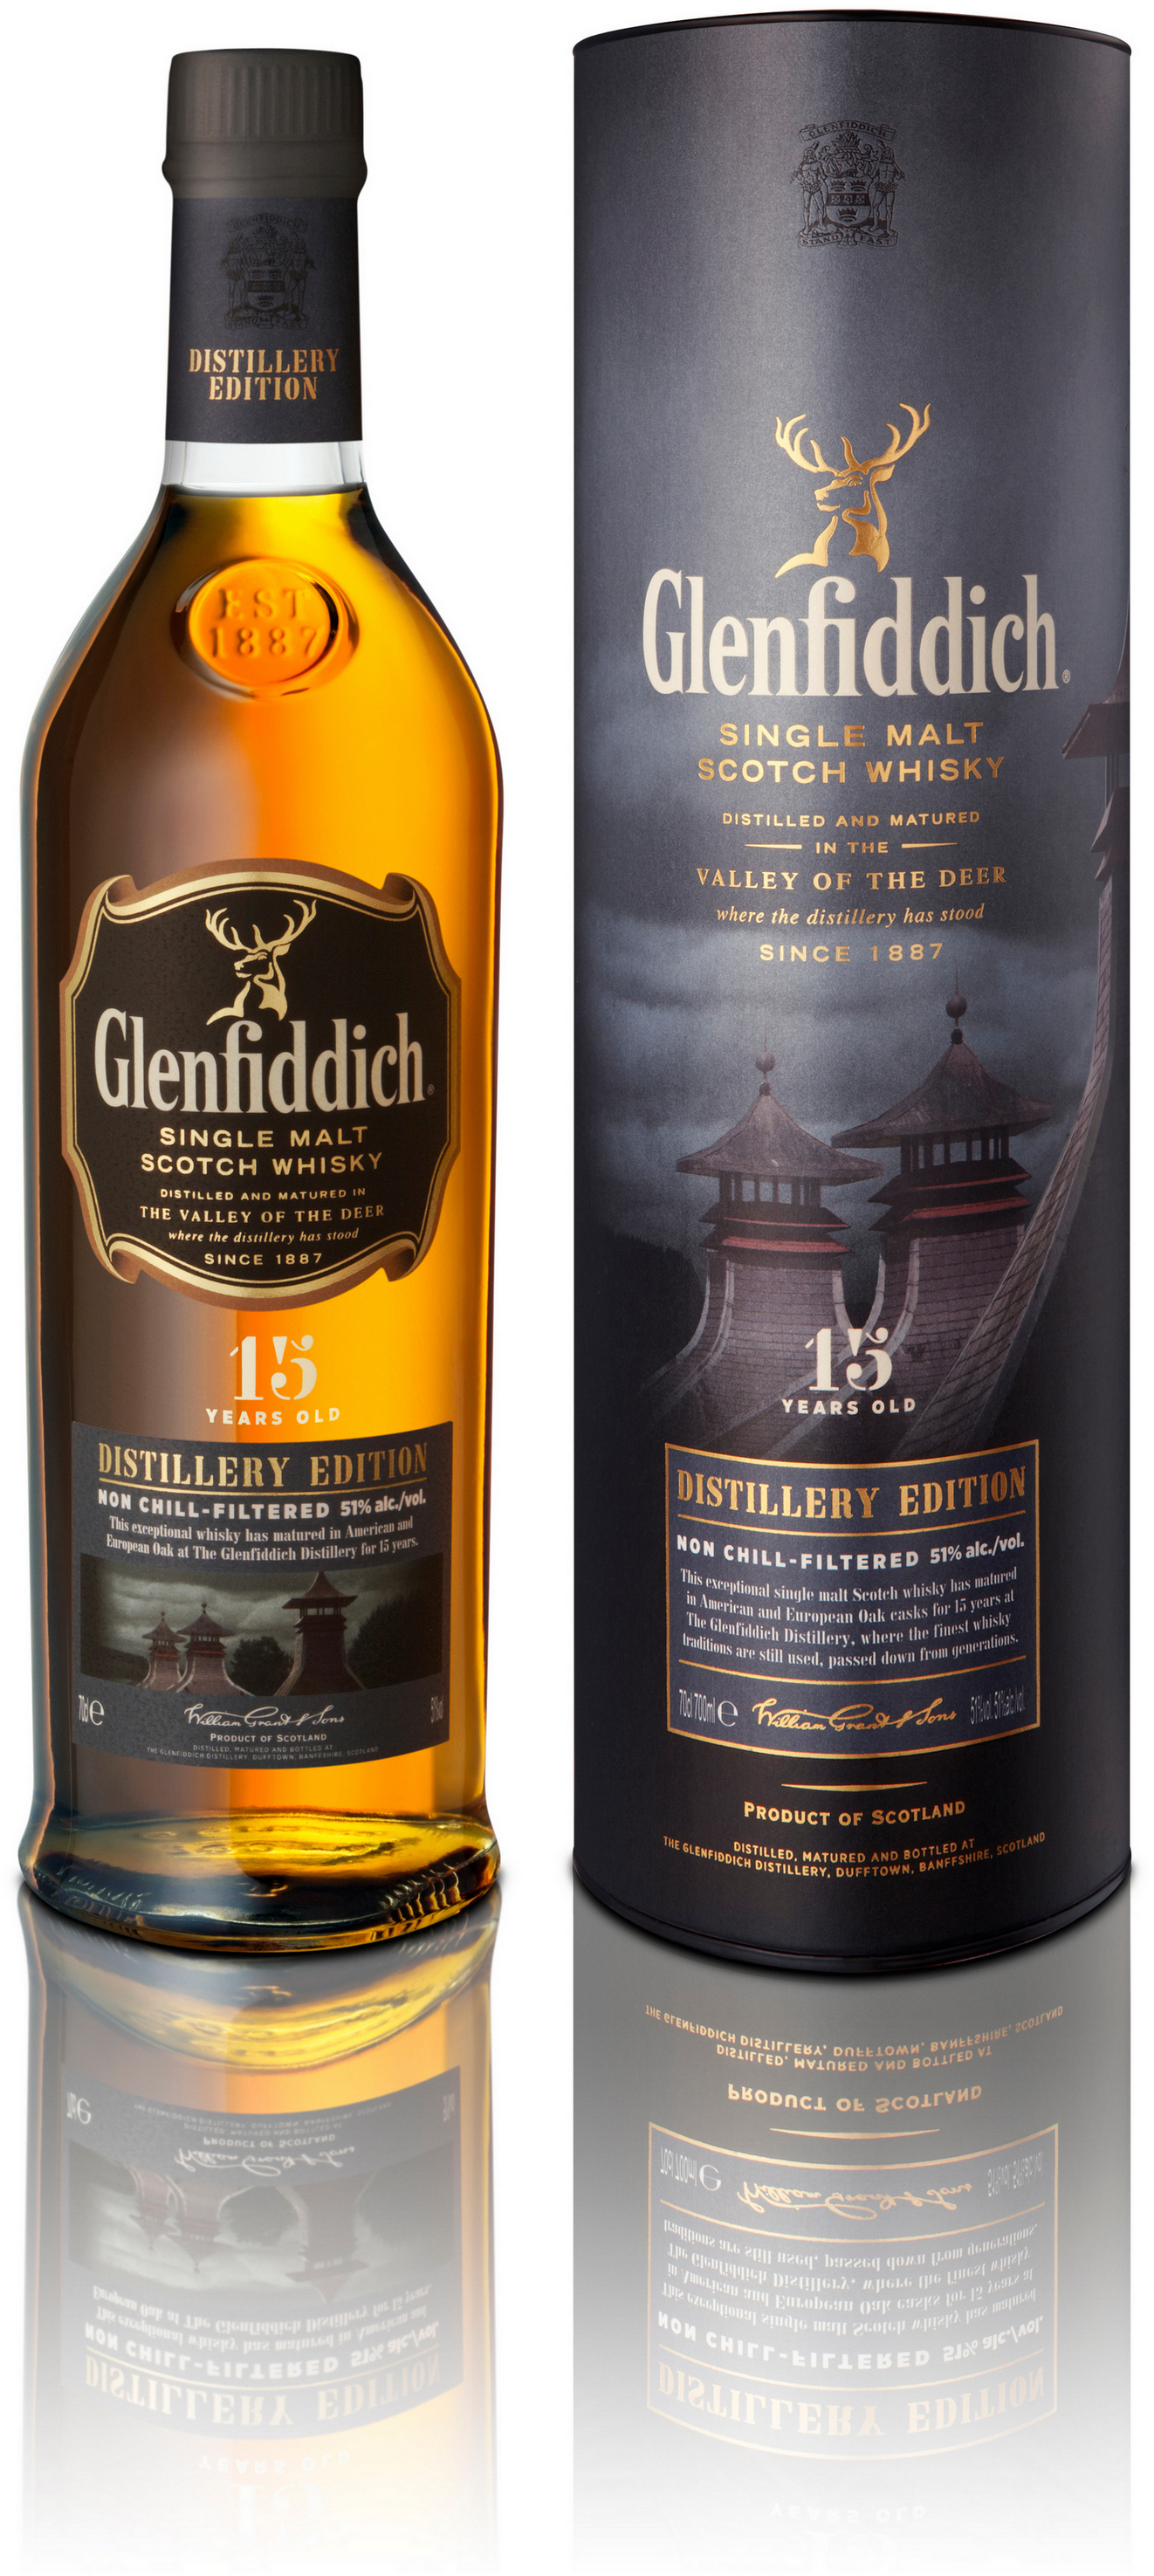 Glenfiddich 15 Year Old Distillery Edition 51 1l In Duty Free At Airport Mumbai On Arrival